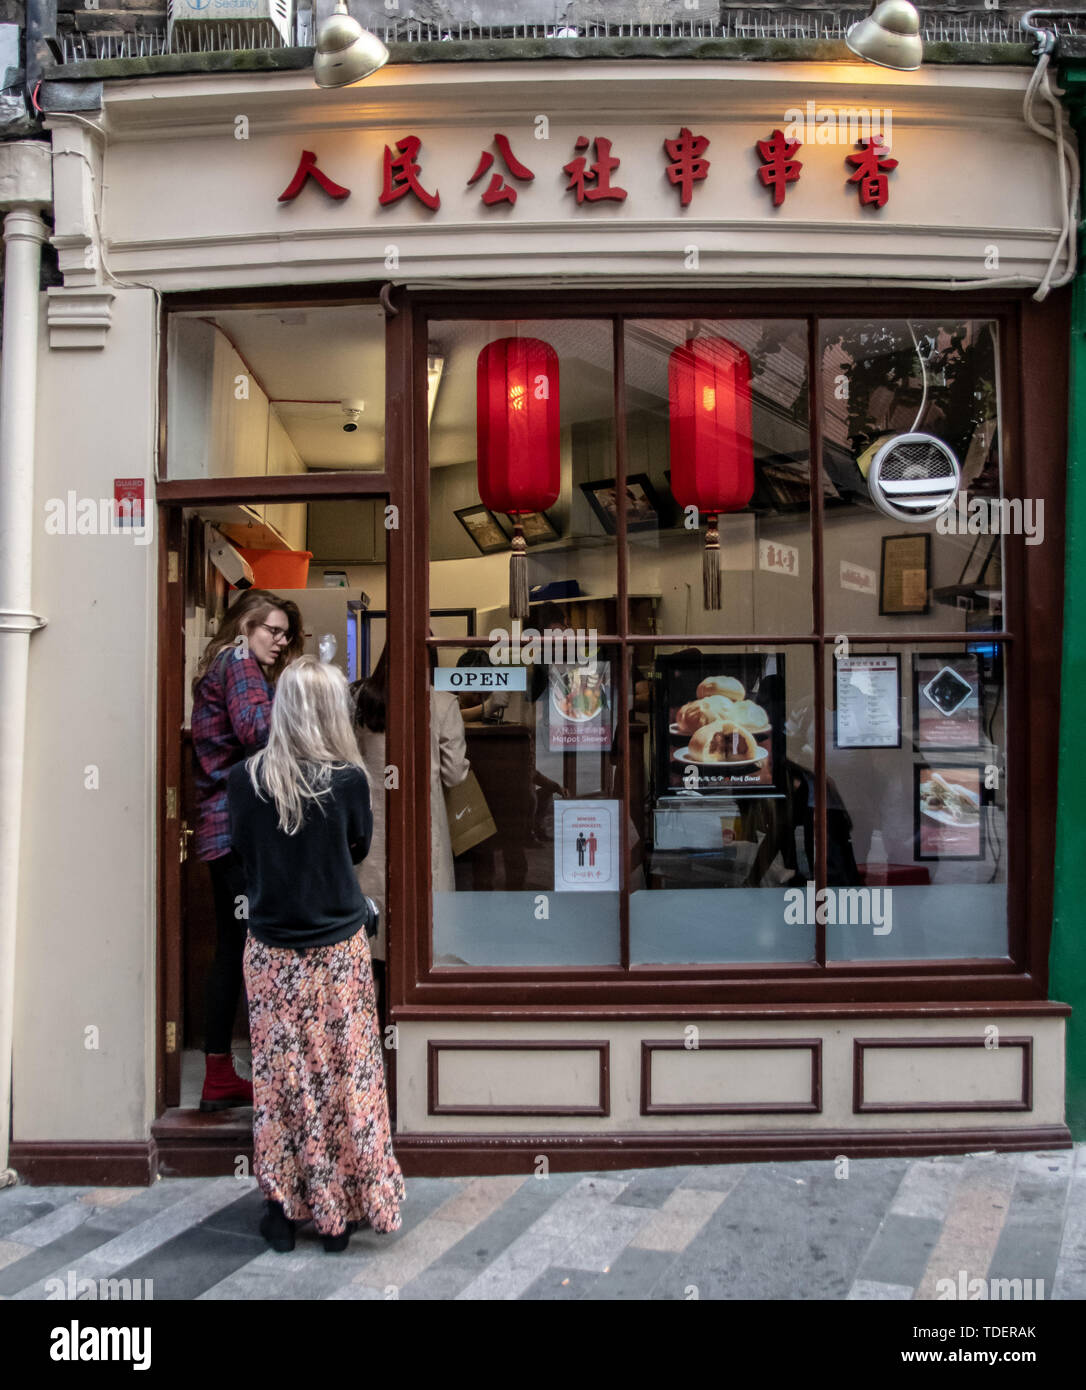 London, UK. London, UK. Tourists enjoy London Chinatown Sweet Tooth Cafe and Restaurant at Newport Court and Garret Street on 15 June 2019, UK. Credit: Picture Capital/Alamy Live News Credit: Picture Capital/Alamy Live News Stock Photo